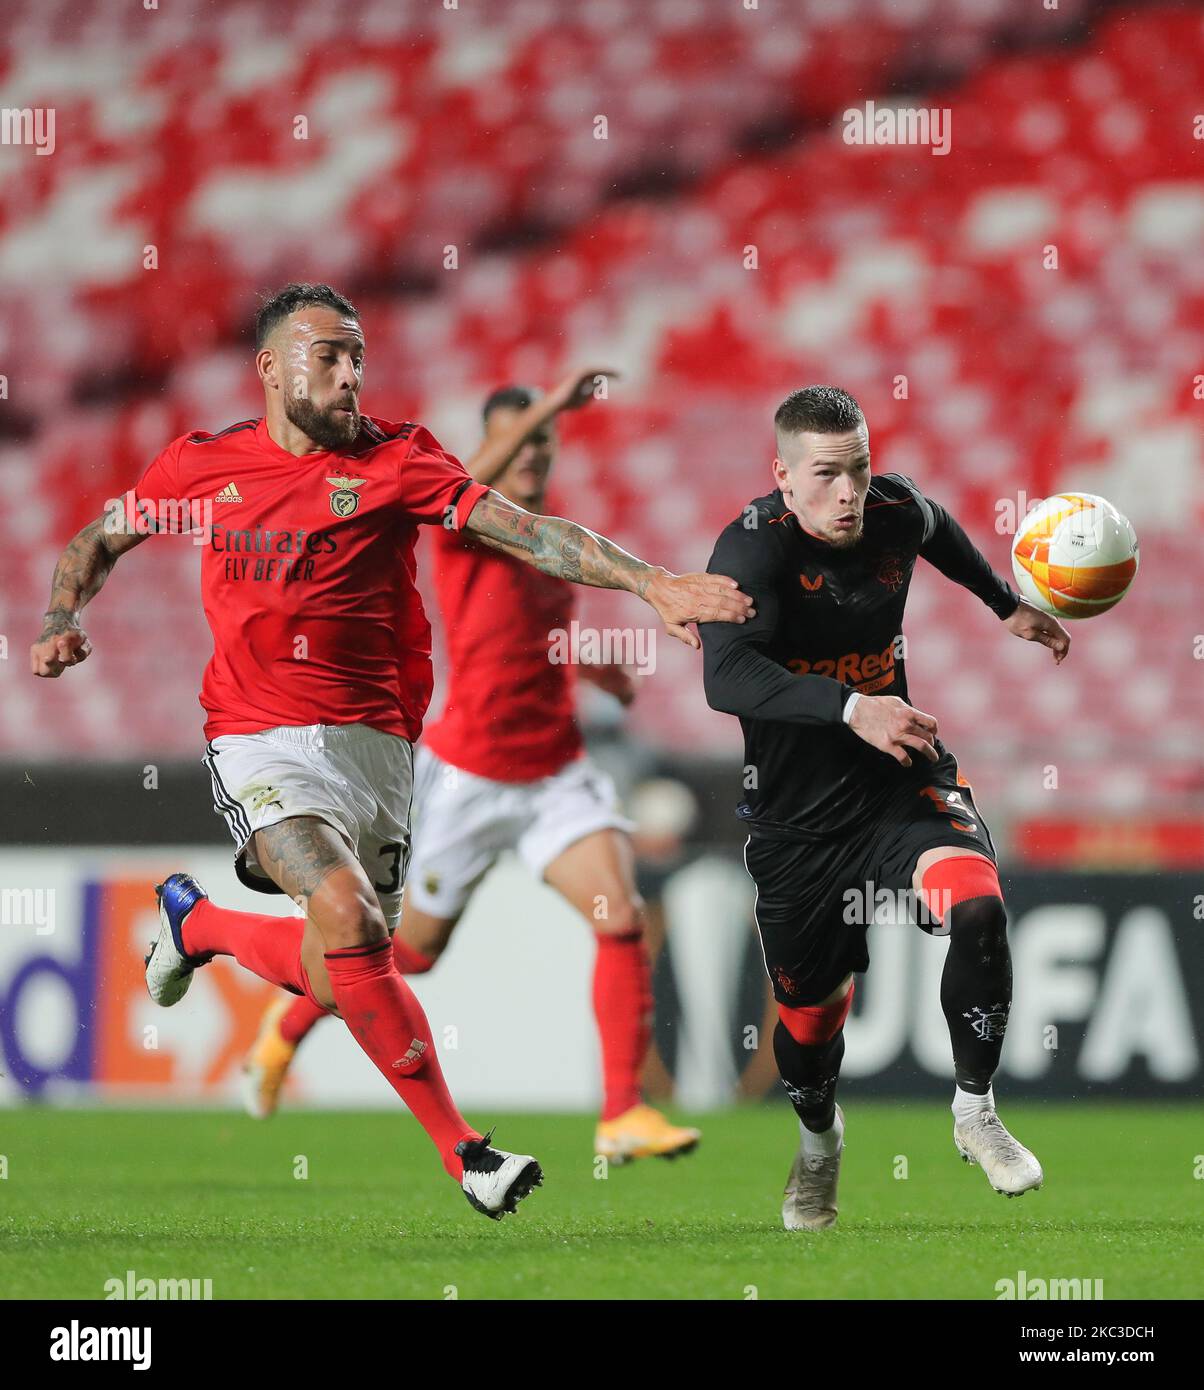 Nicolas Otamendi (L) of SL Benfica vies Ryan Jack (R) of Rangers FC during the UEFA Europa League Group D stage match between SL Benfica and Rangers FC at Estadio da Luz on November 5, 2020 in Lisbon, Portugal. (Photo by Paulo Nascimento/NurPhoto) Stock Photo